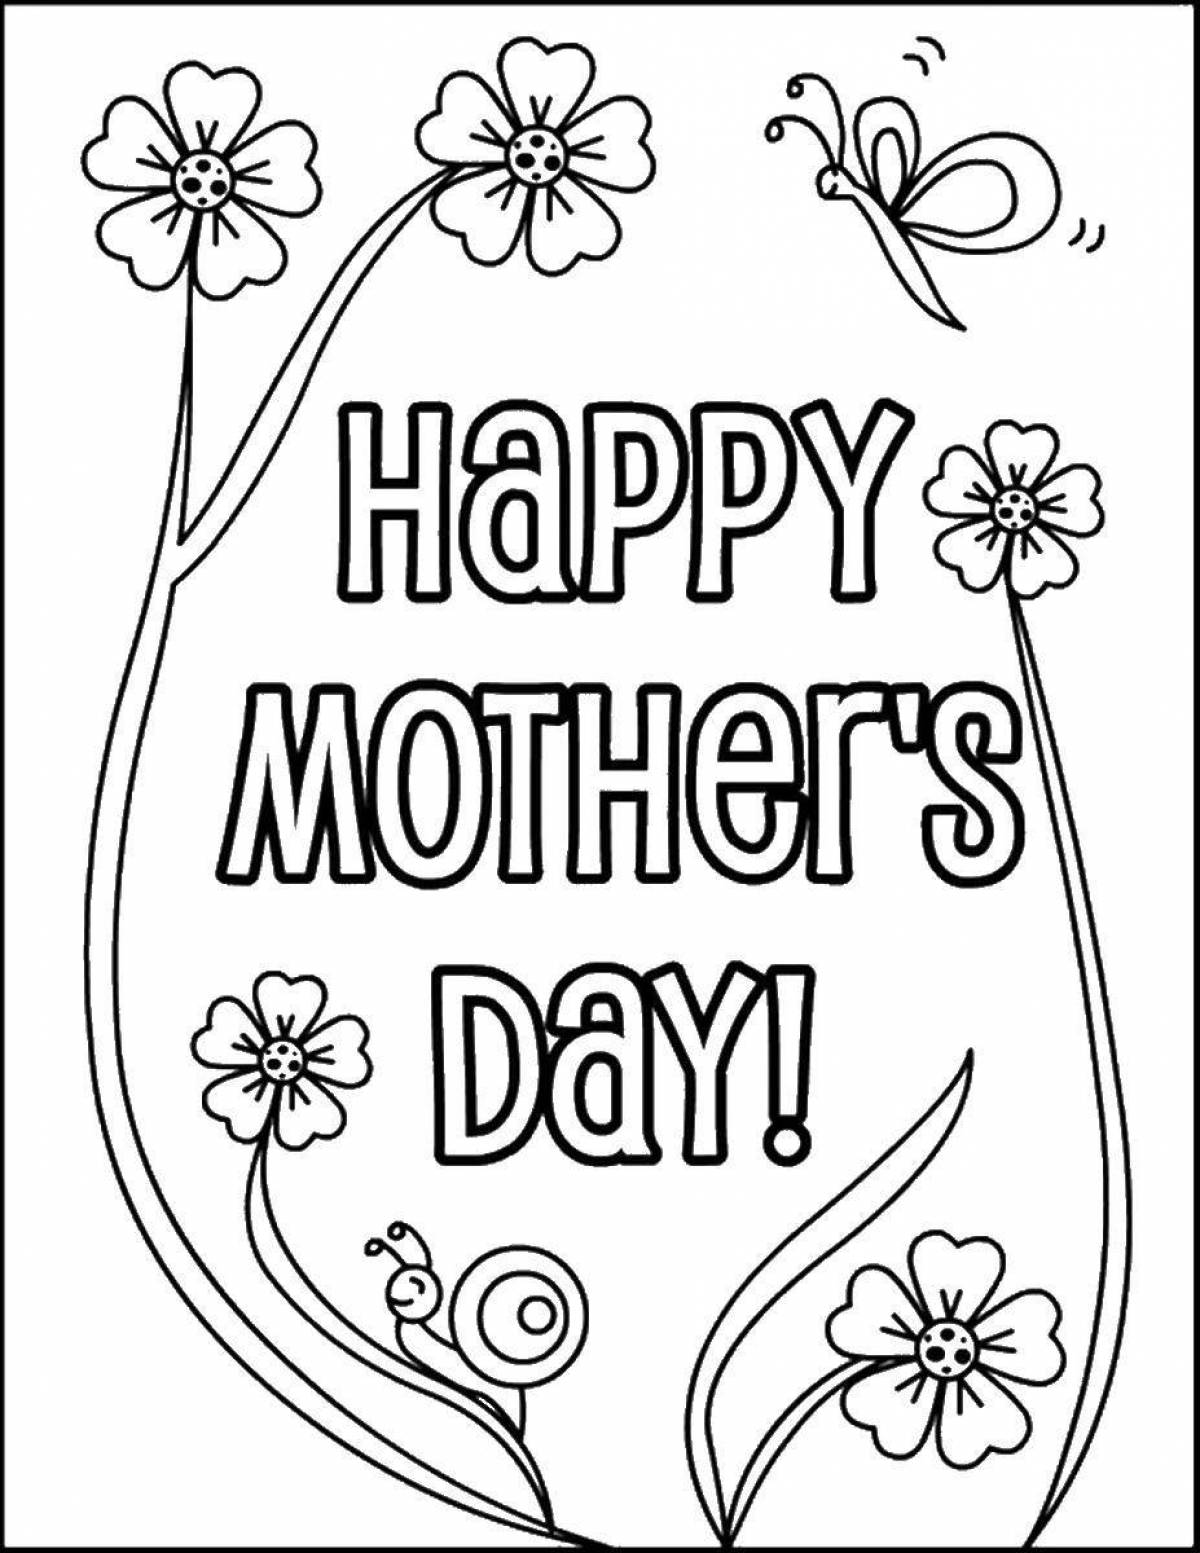 Coloring page glowing mother's day card